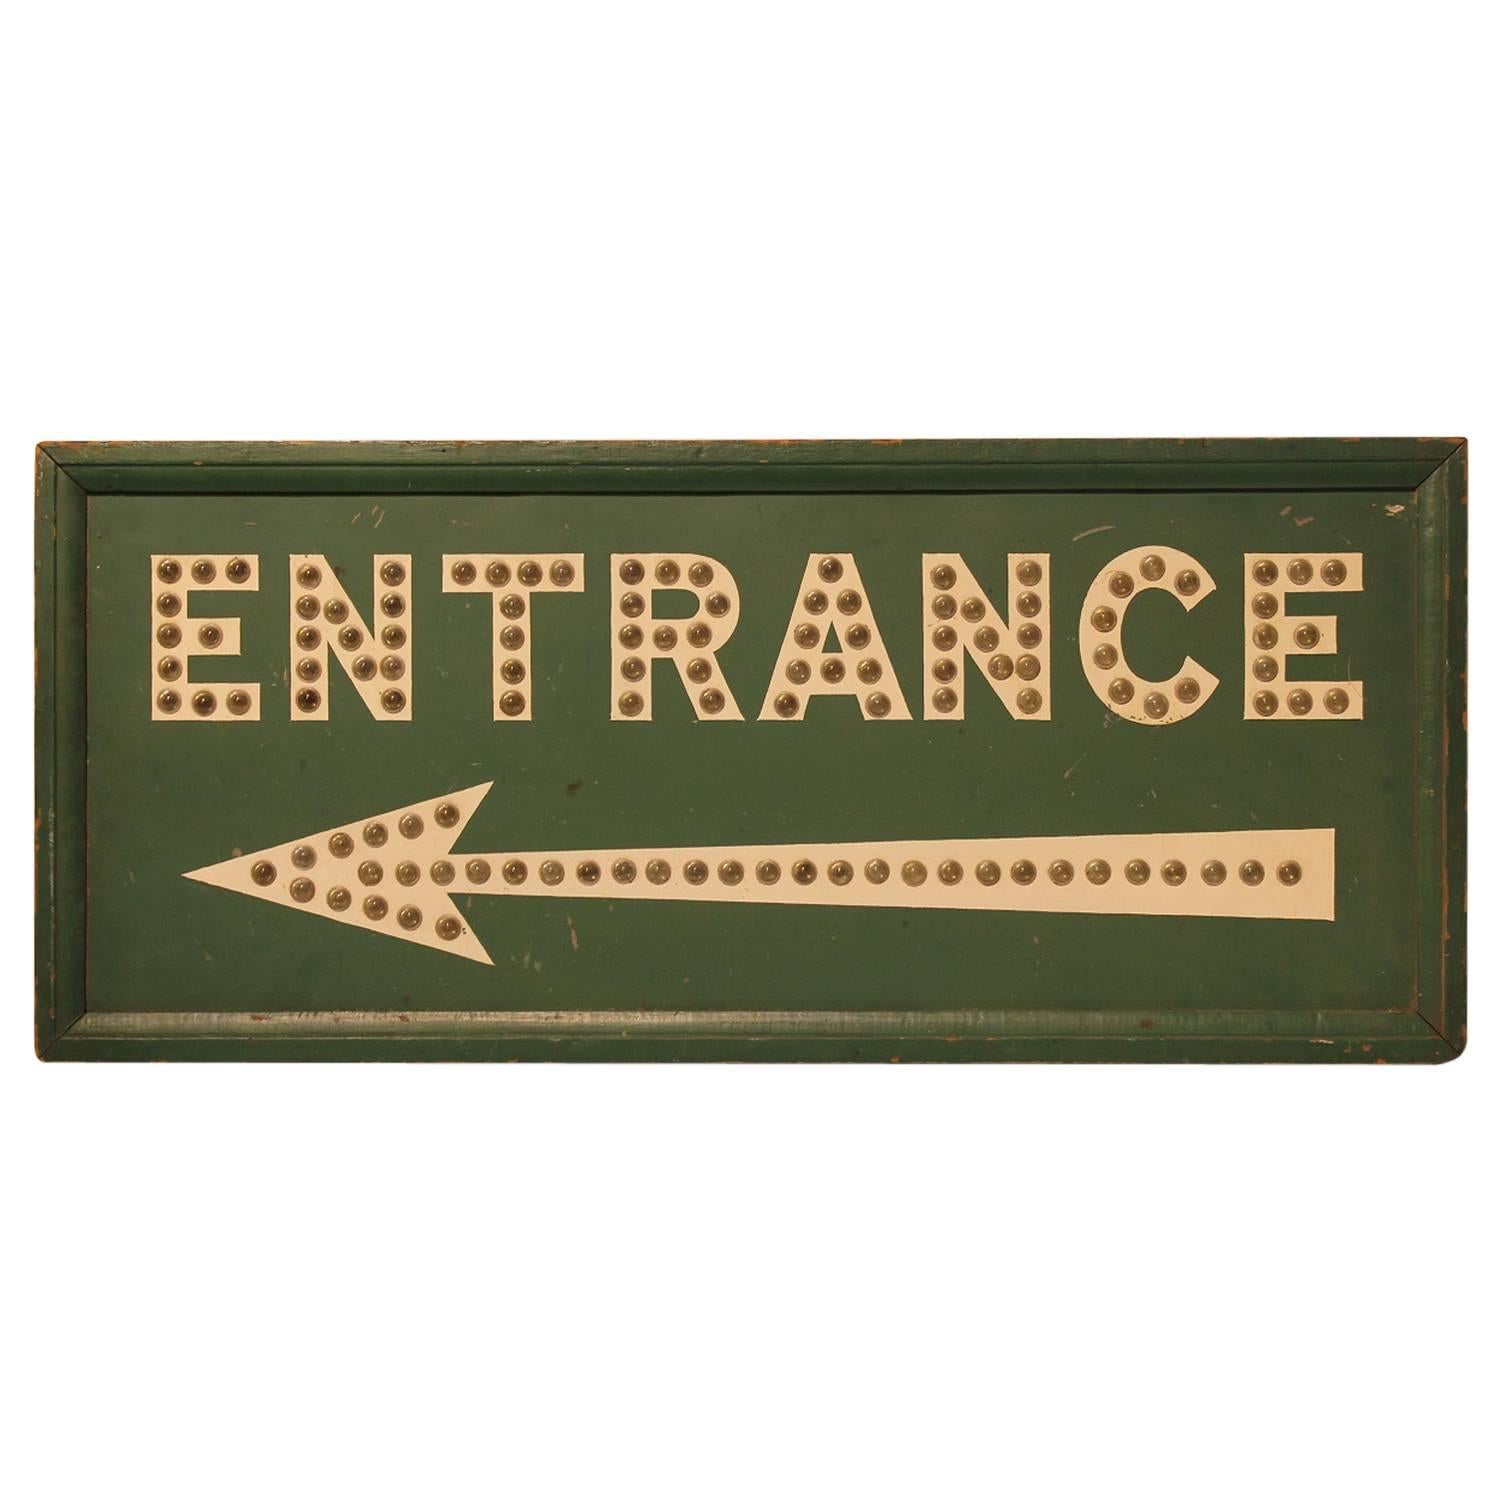 1930s Double Sided Reflective Marbles "Entrance" Sign For Sale